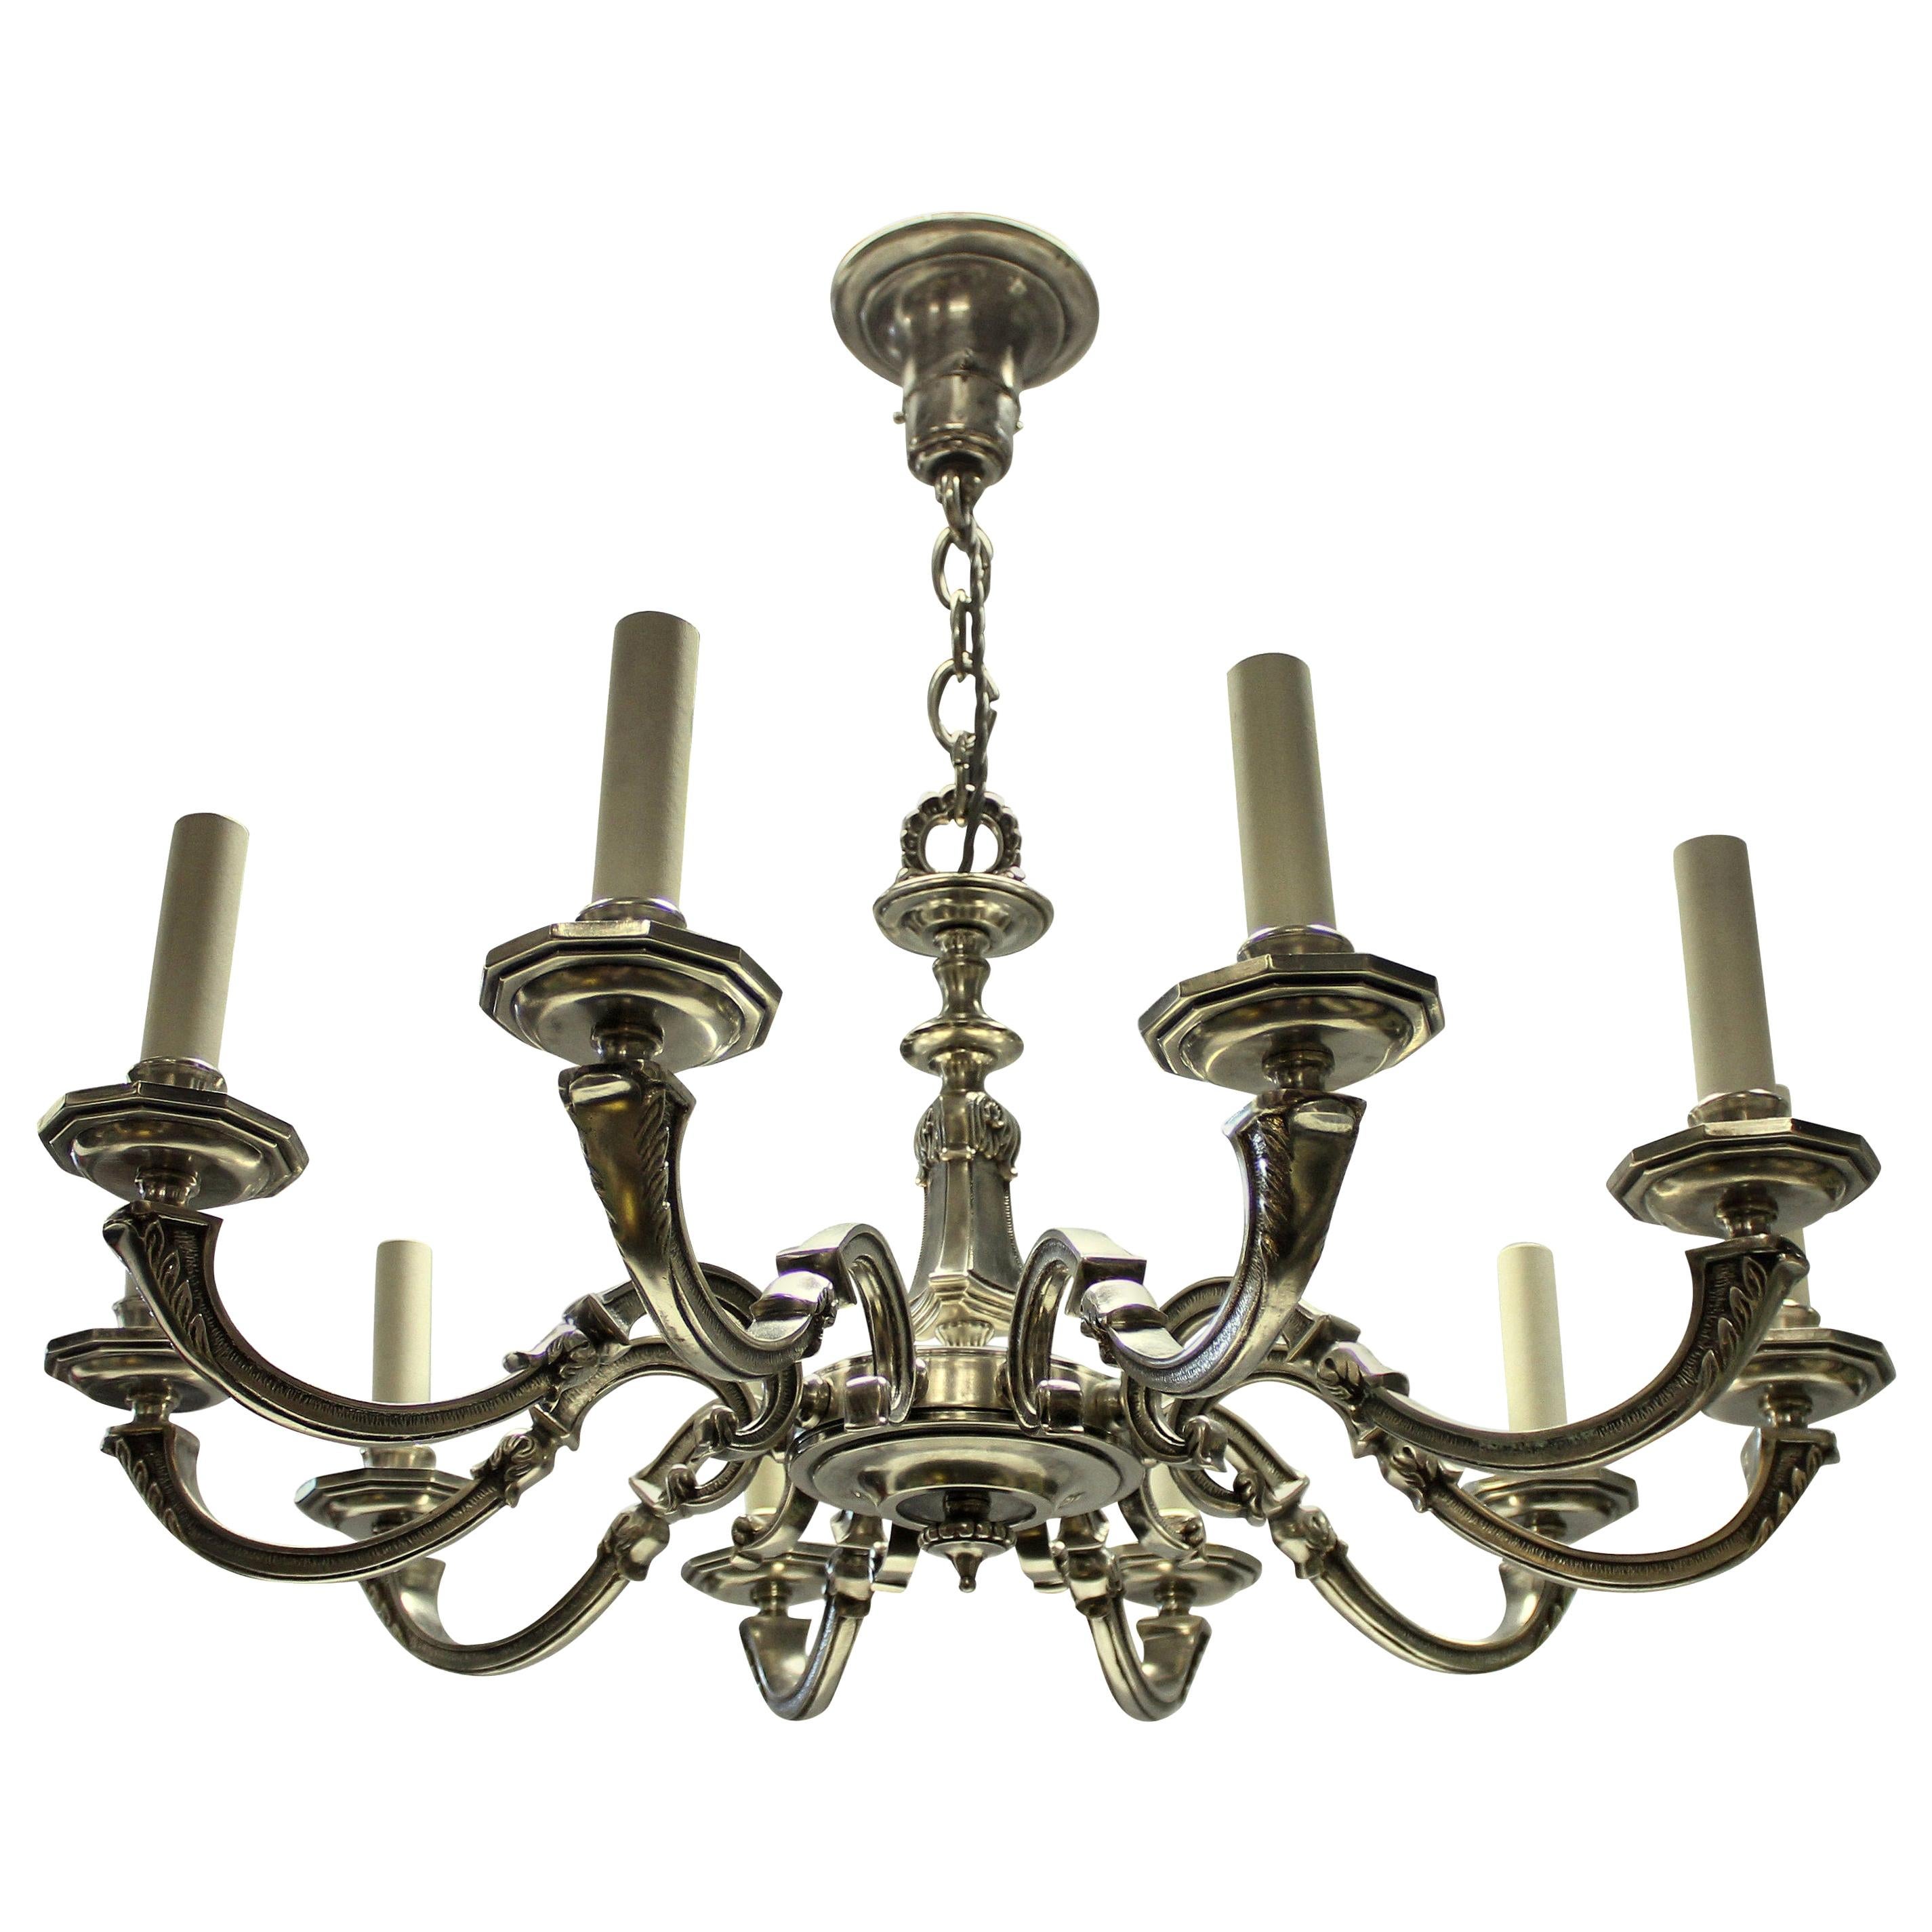 Ten Branch Silver Plated Neo Classical Chandelier